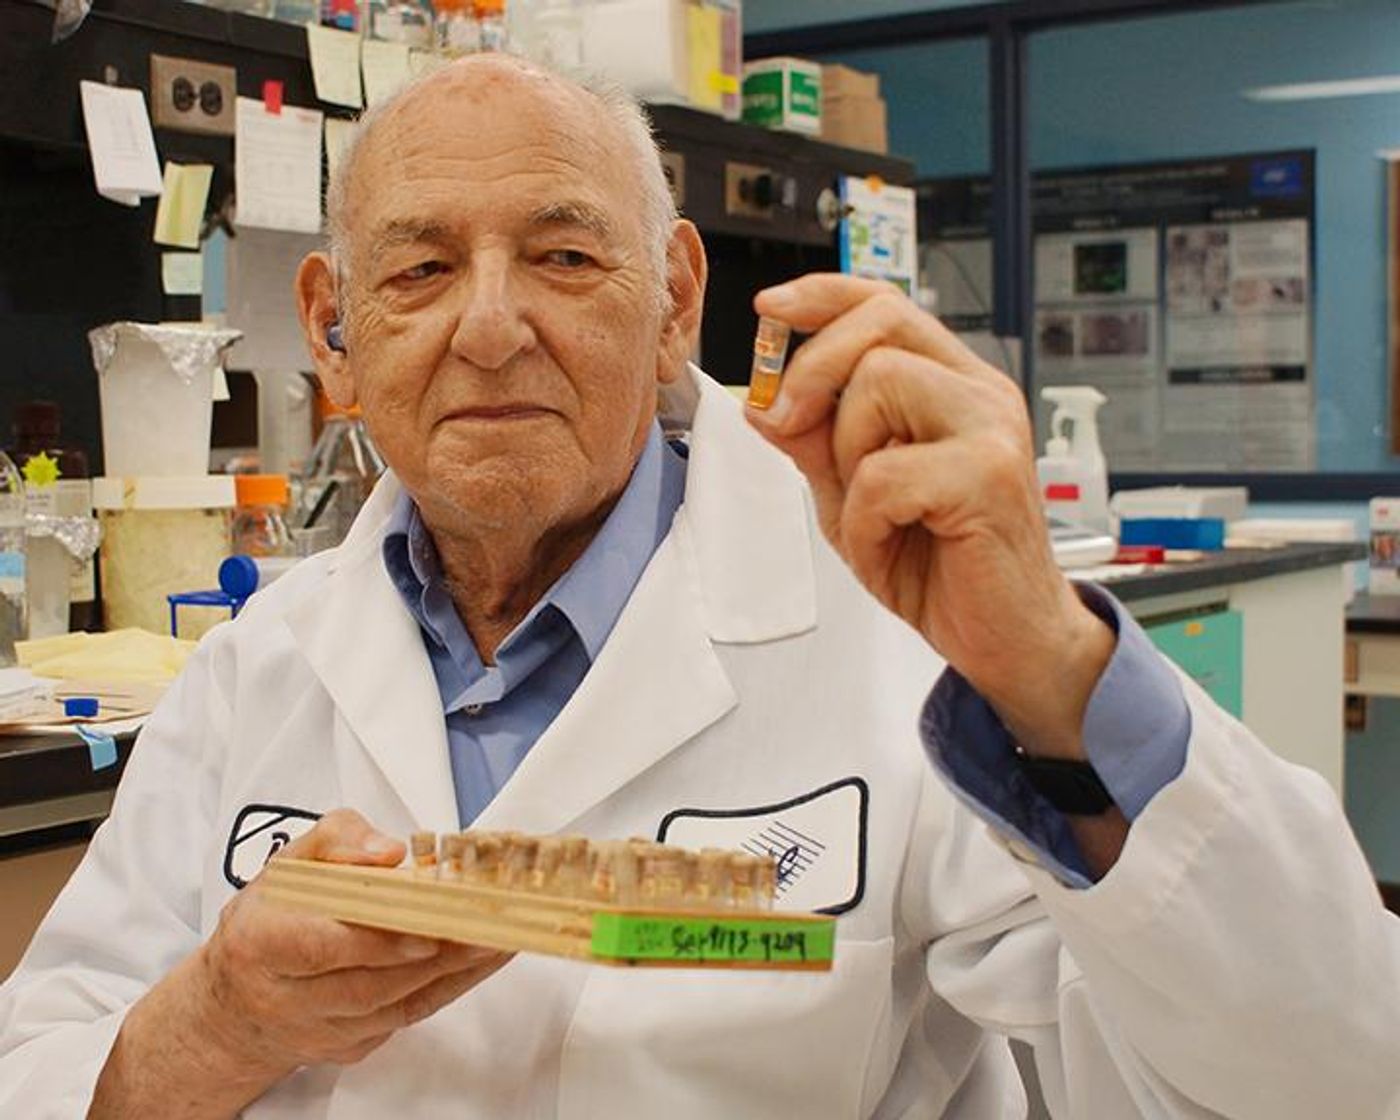 Abraham Eisenstark, the research director at the Cancer Research Center and professor emeritus of biological sciences at MU, began testing a collection of vials of Salmonella that had been sitting on a shelf for decades./Credit: Alycia McGee, Cancer Research Center